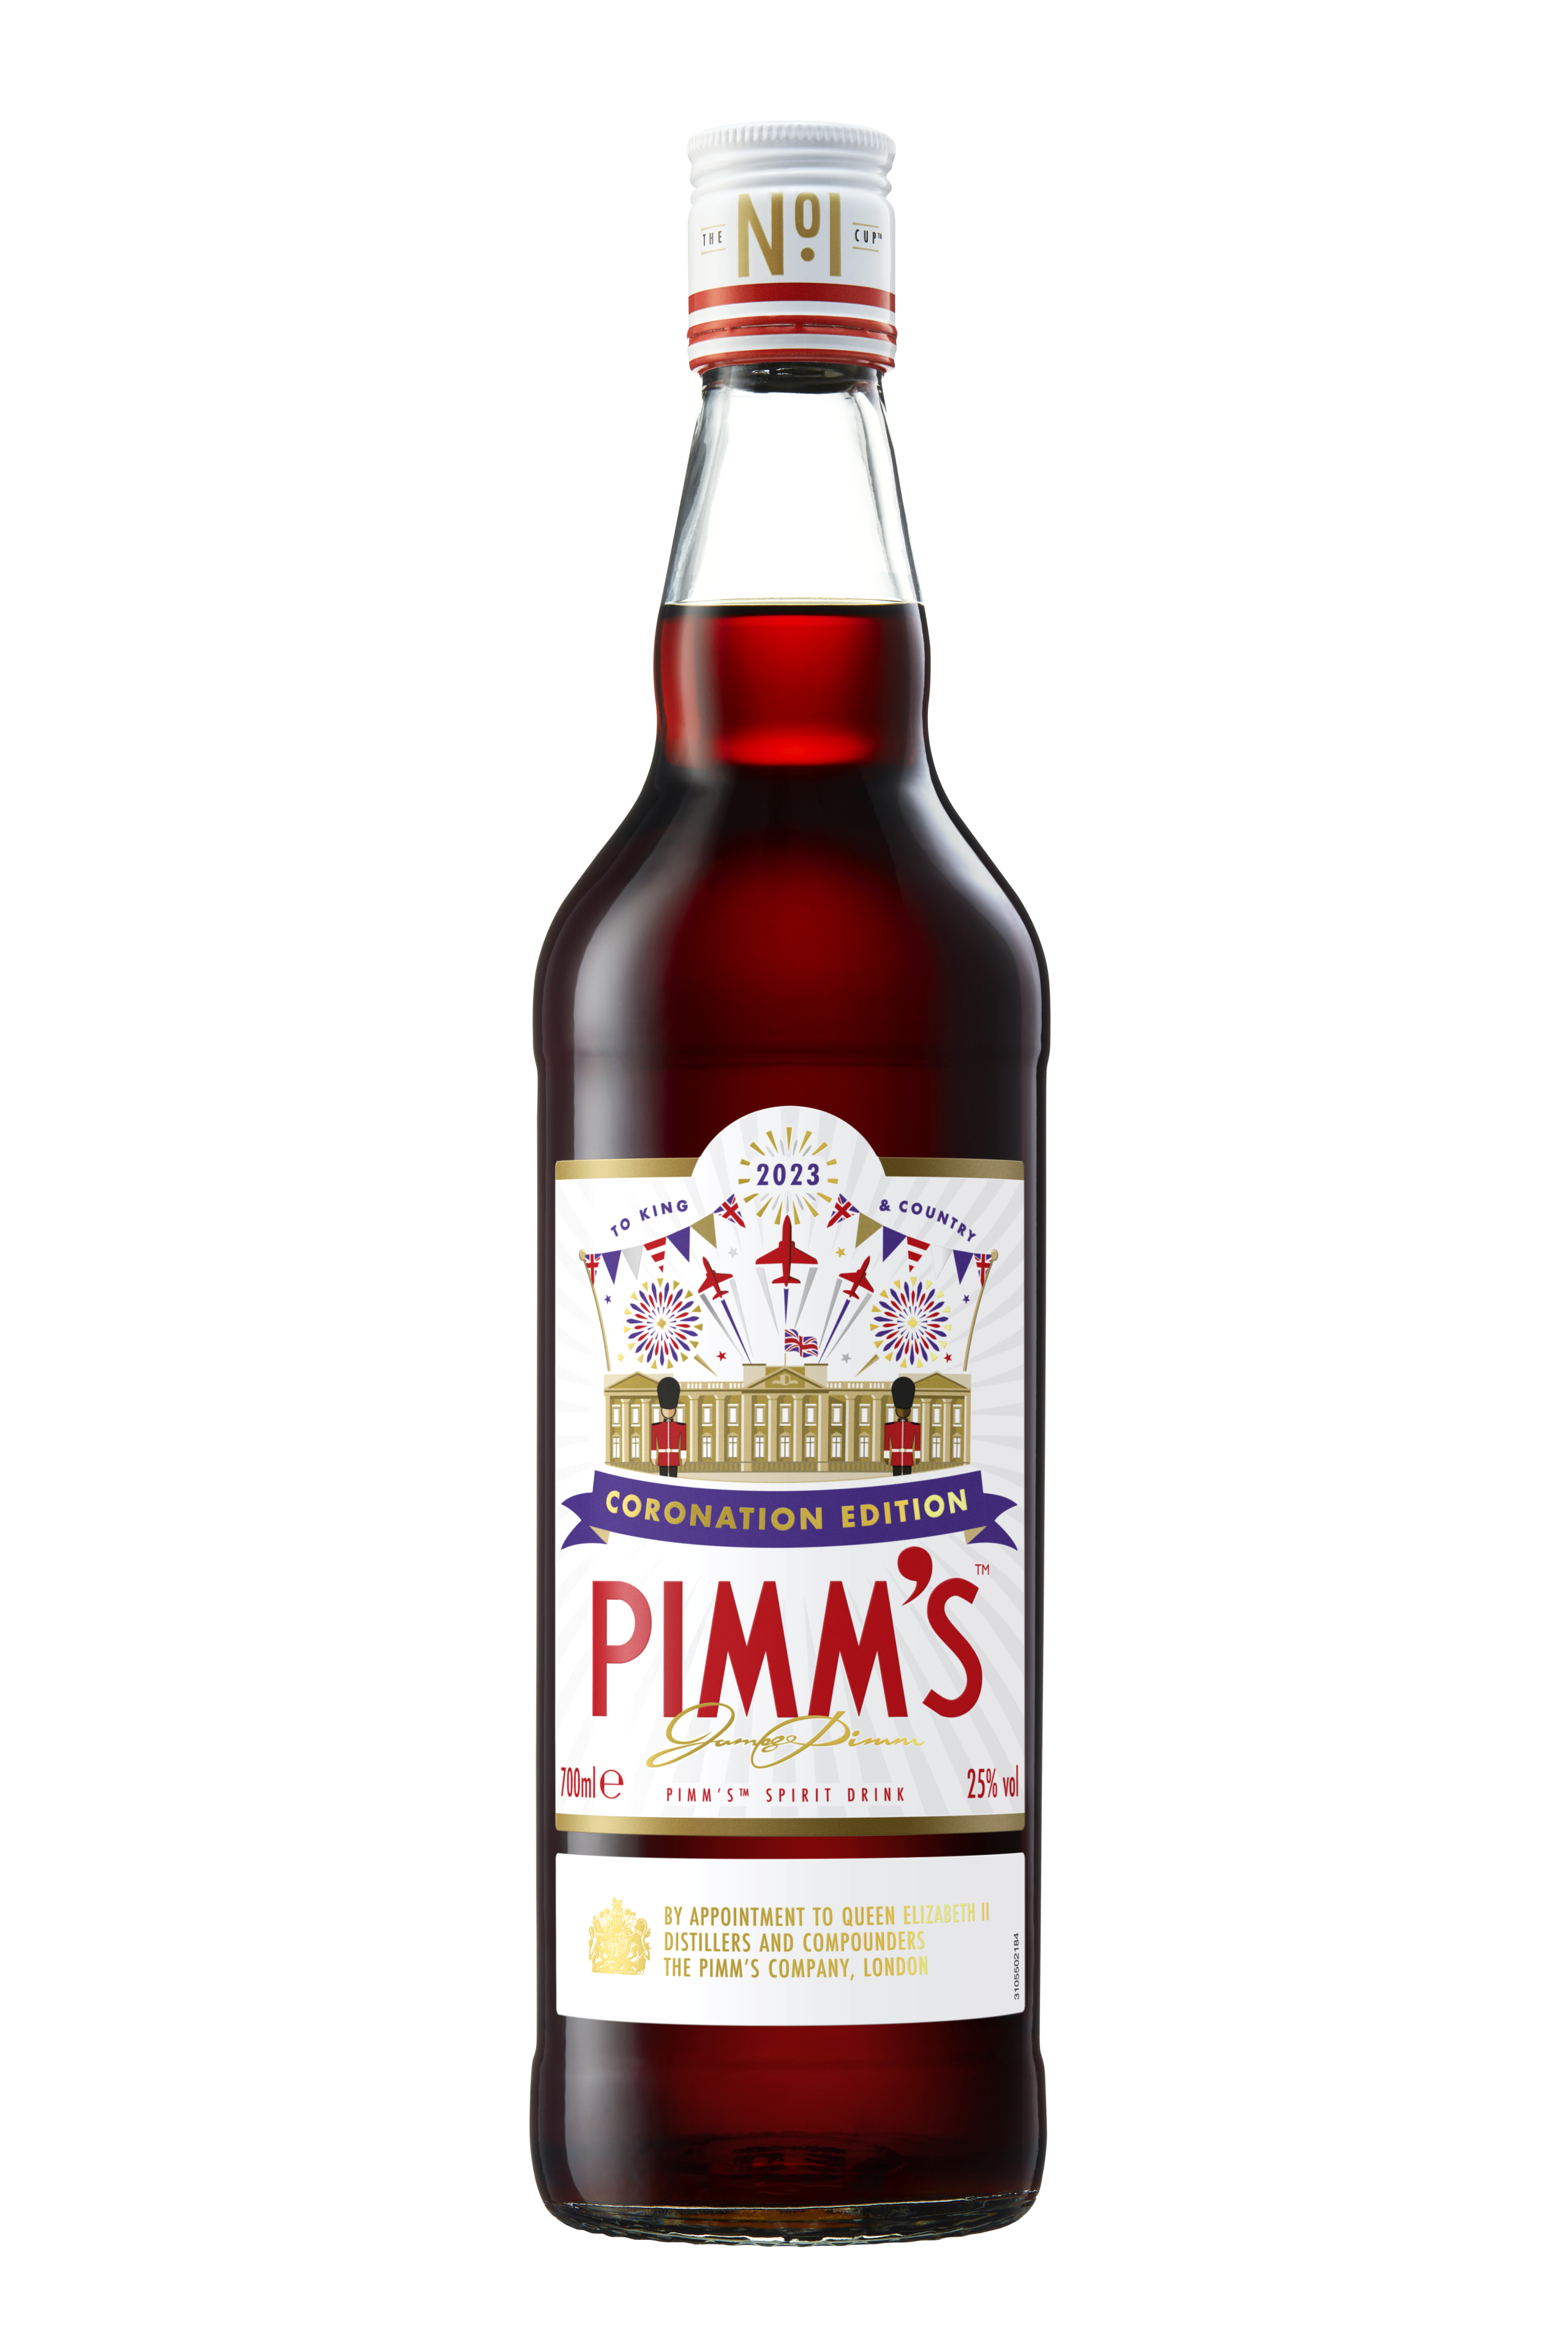 Pimm’s celebrates King’s Coronation with limited-edition bottle